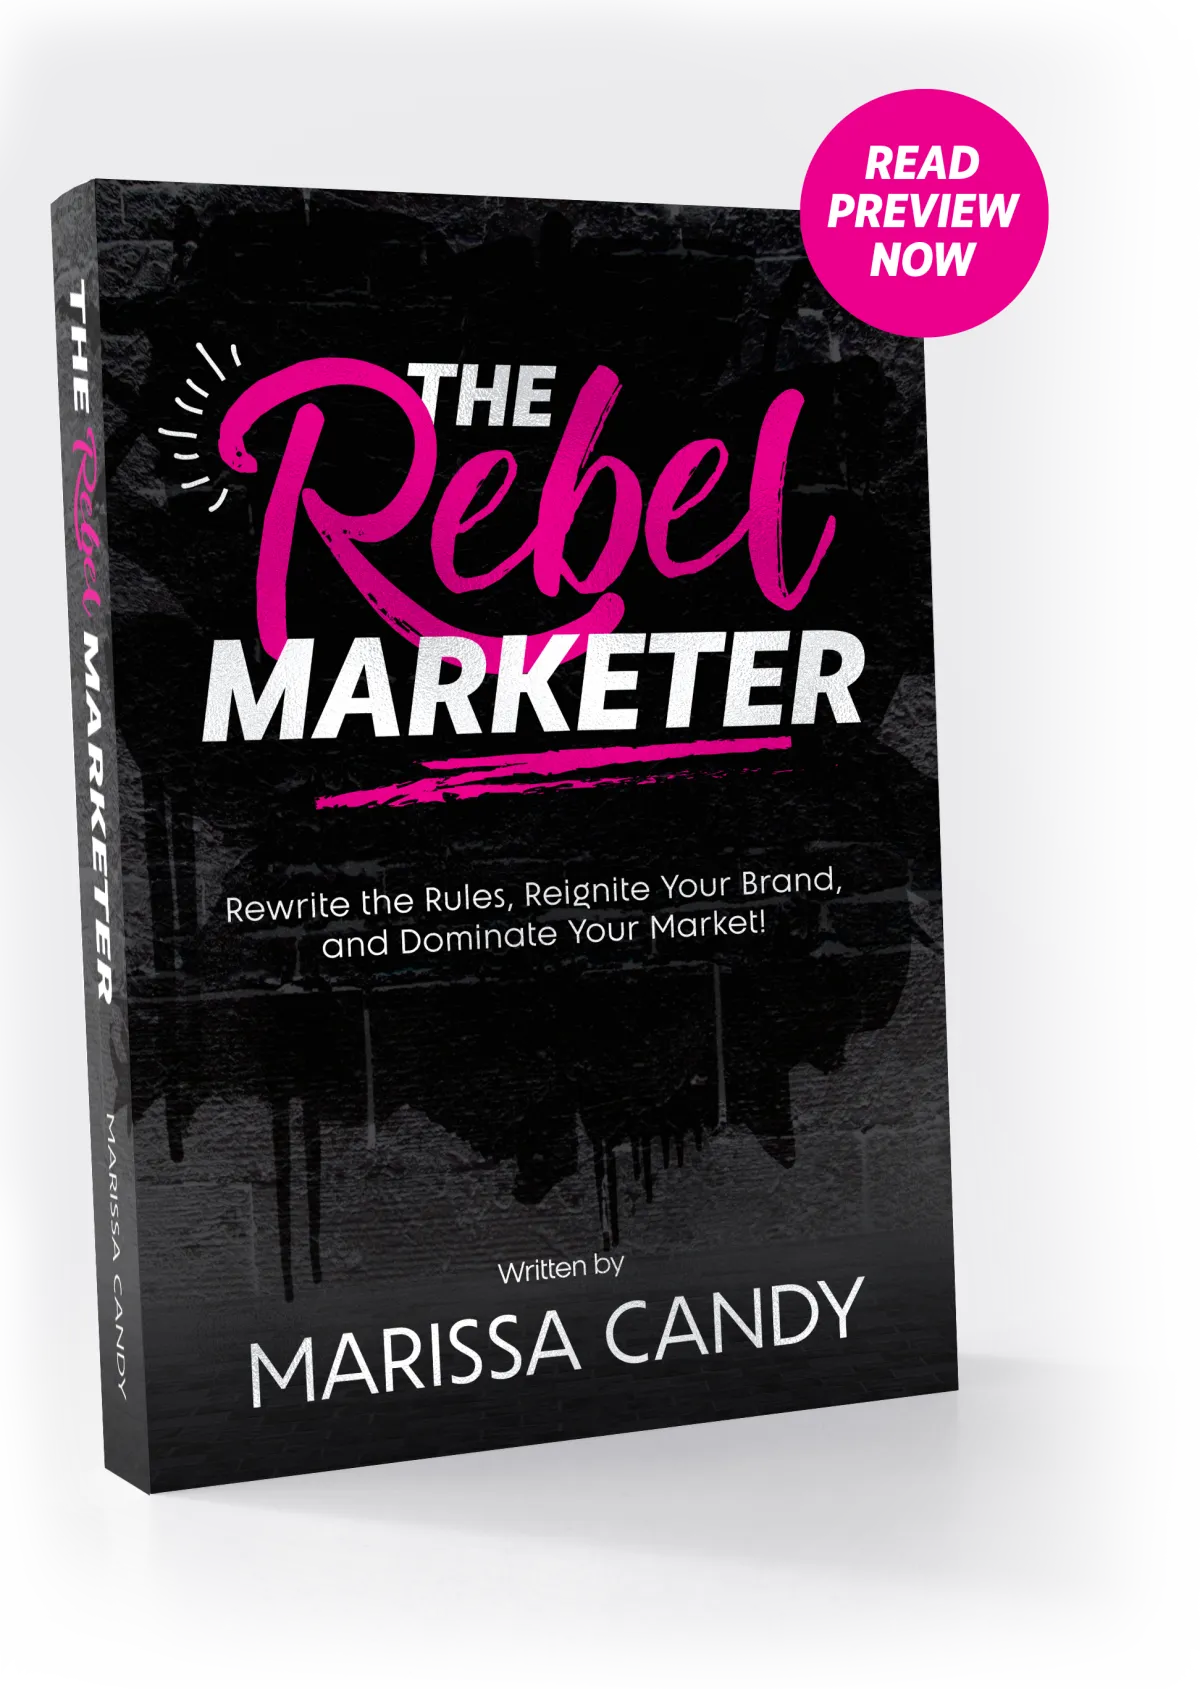 This is an image of The Rebel Marketer's book